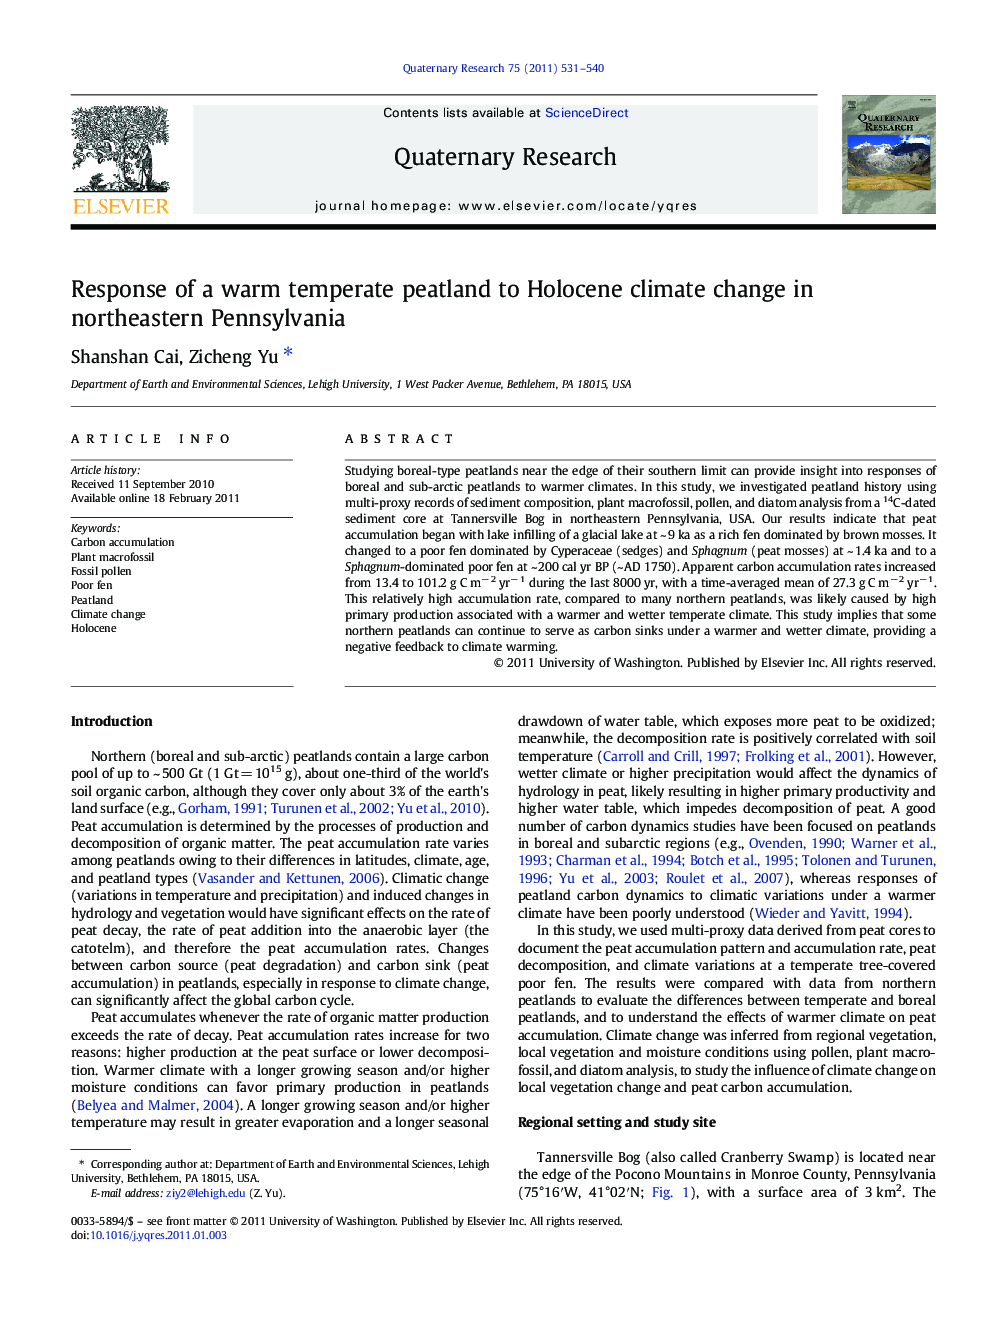 Response of a warm temperate peatland to Holocene climate change in northeastern Pennsylvania